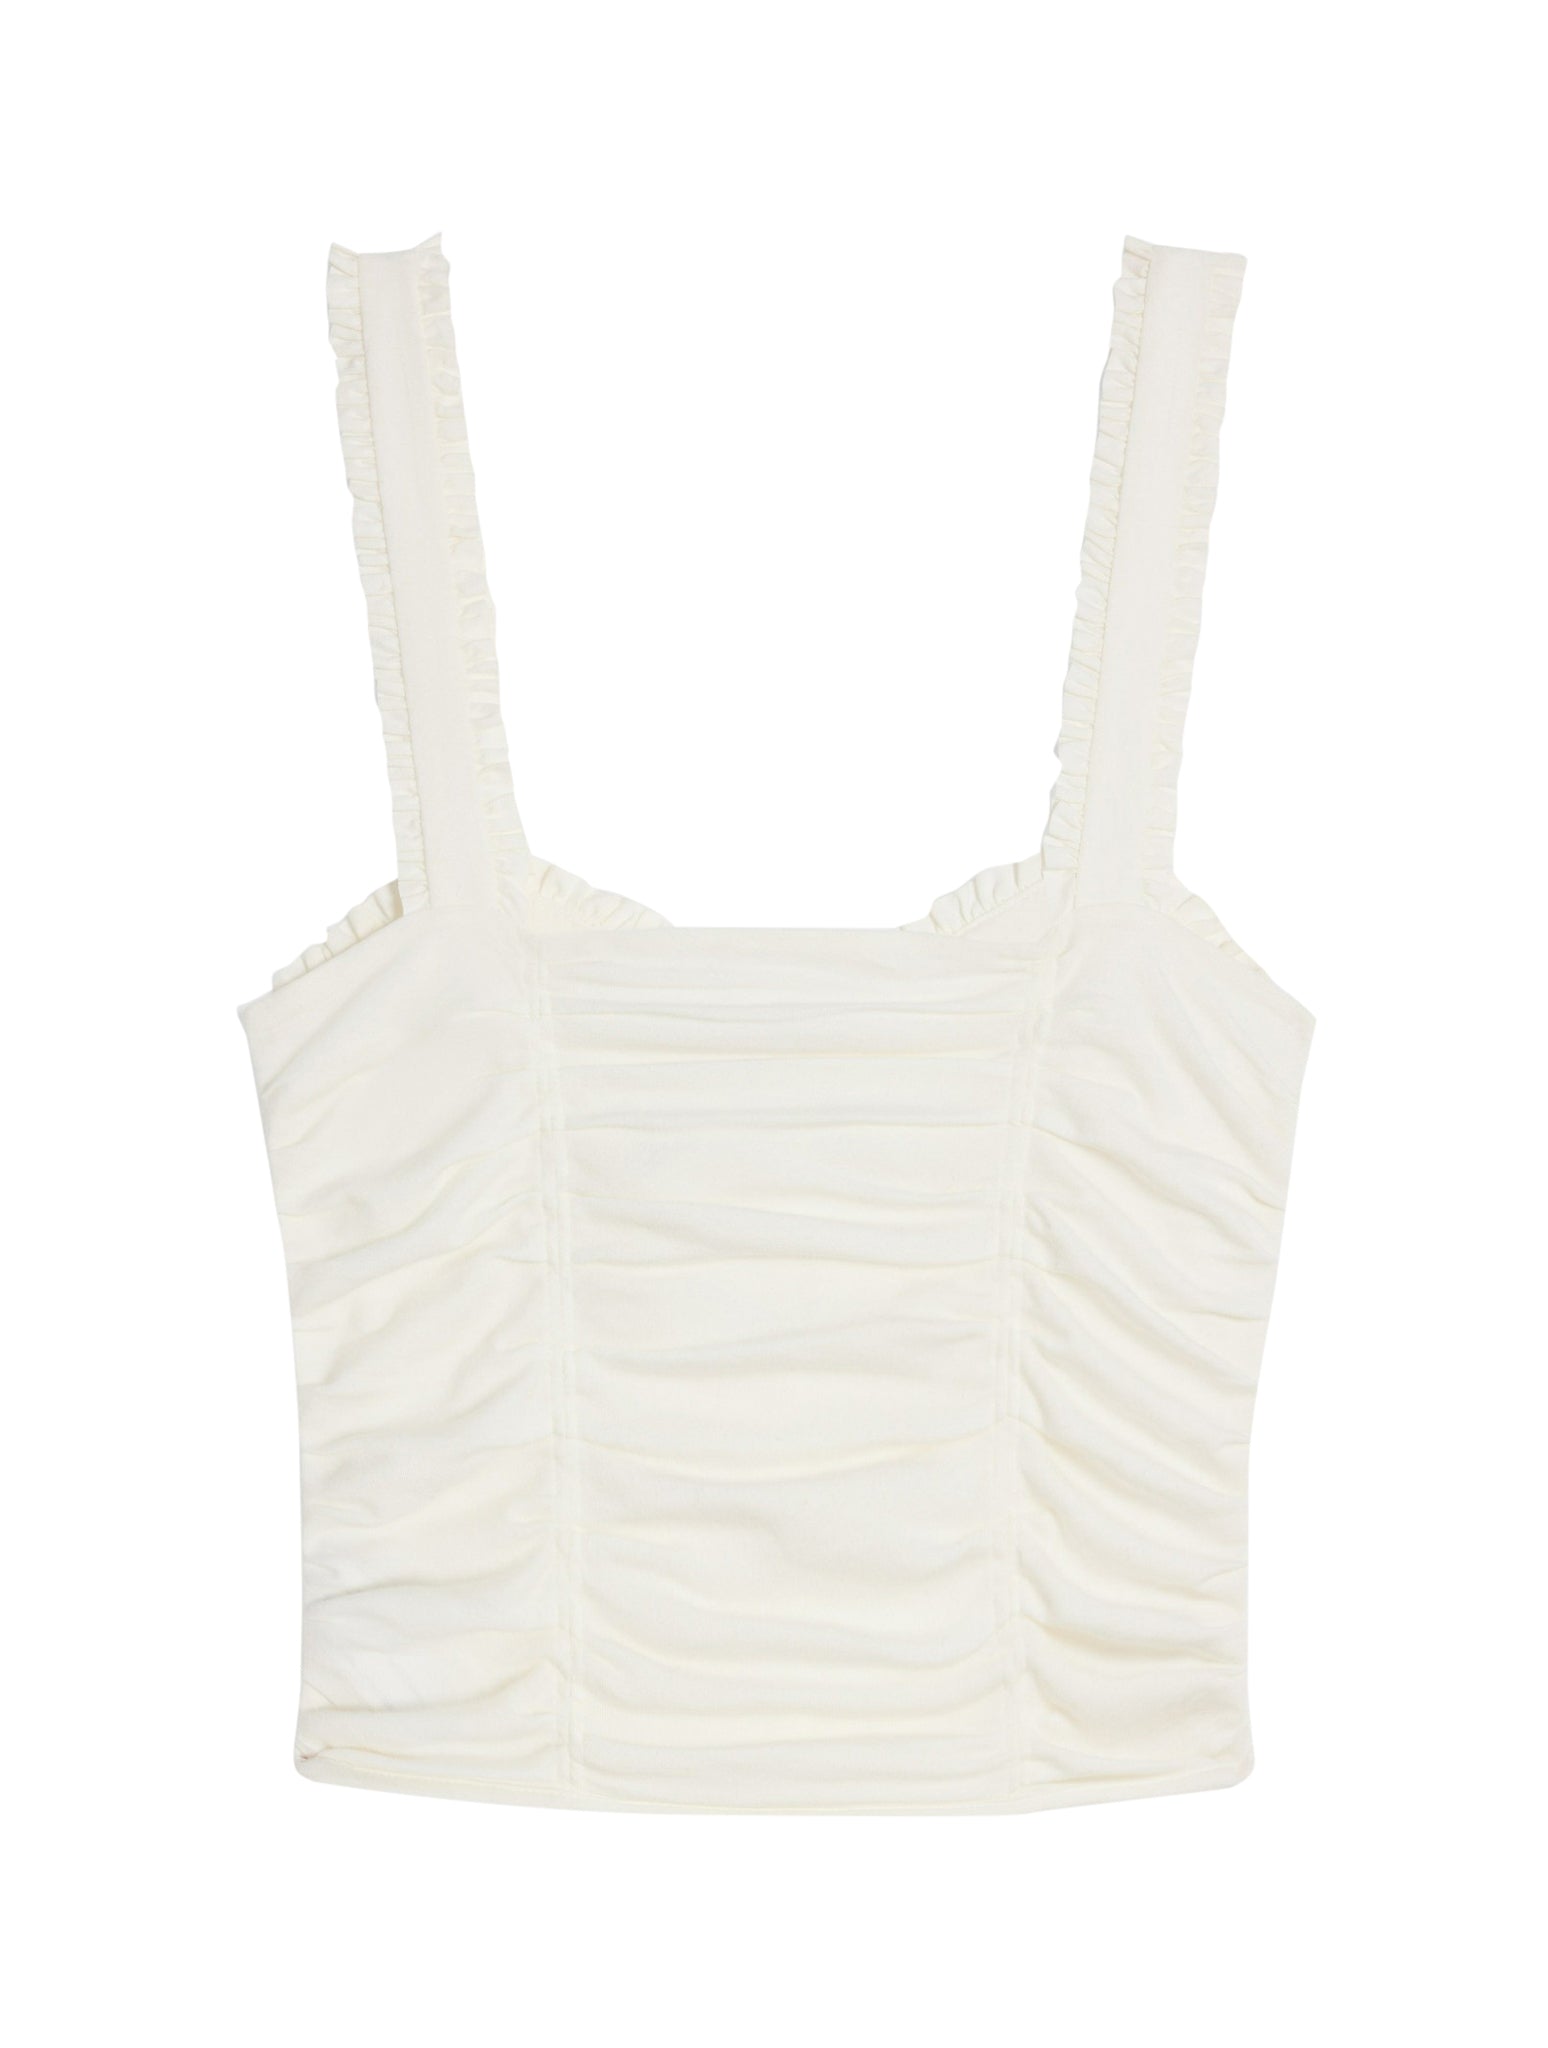 SHORT RUFFLED TOP IN COTTON AND SILK JERSEY